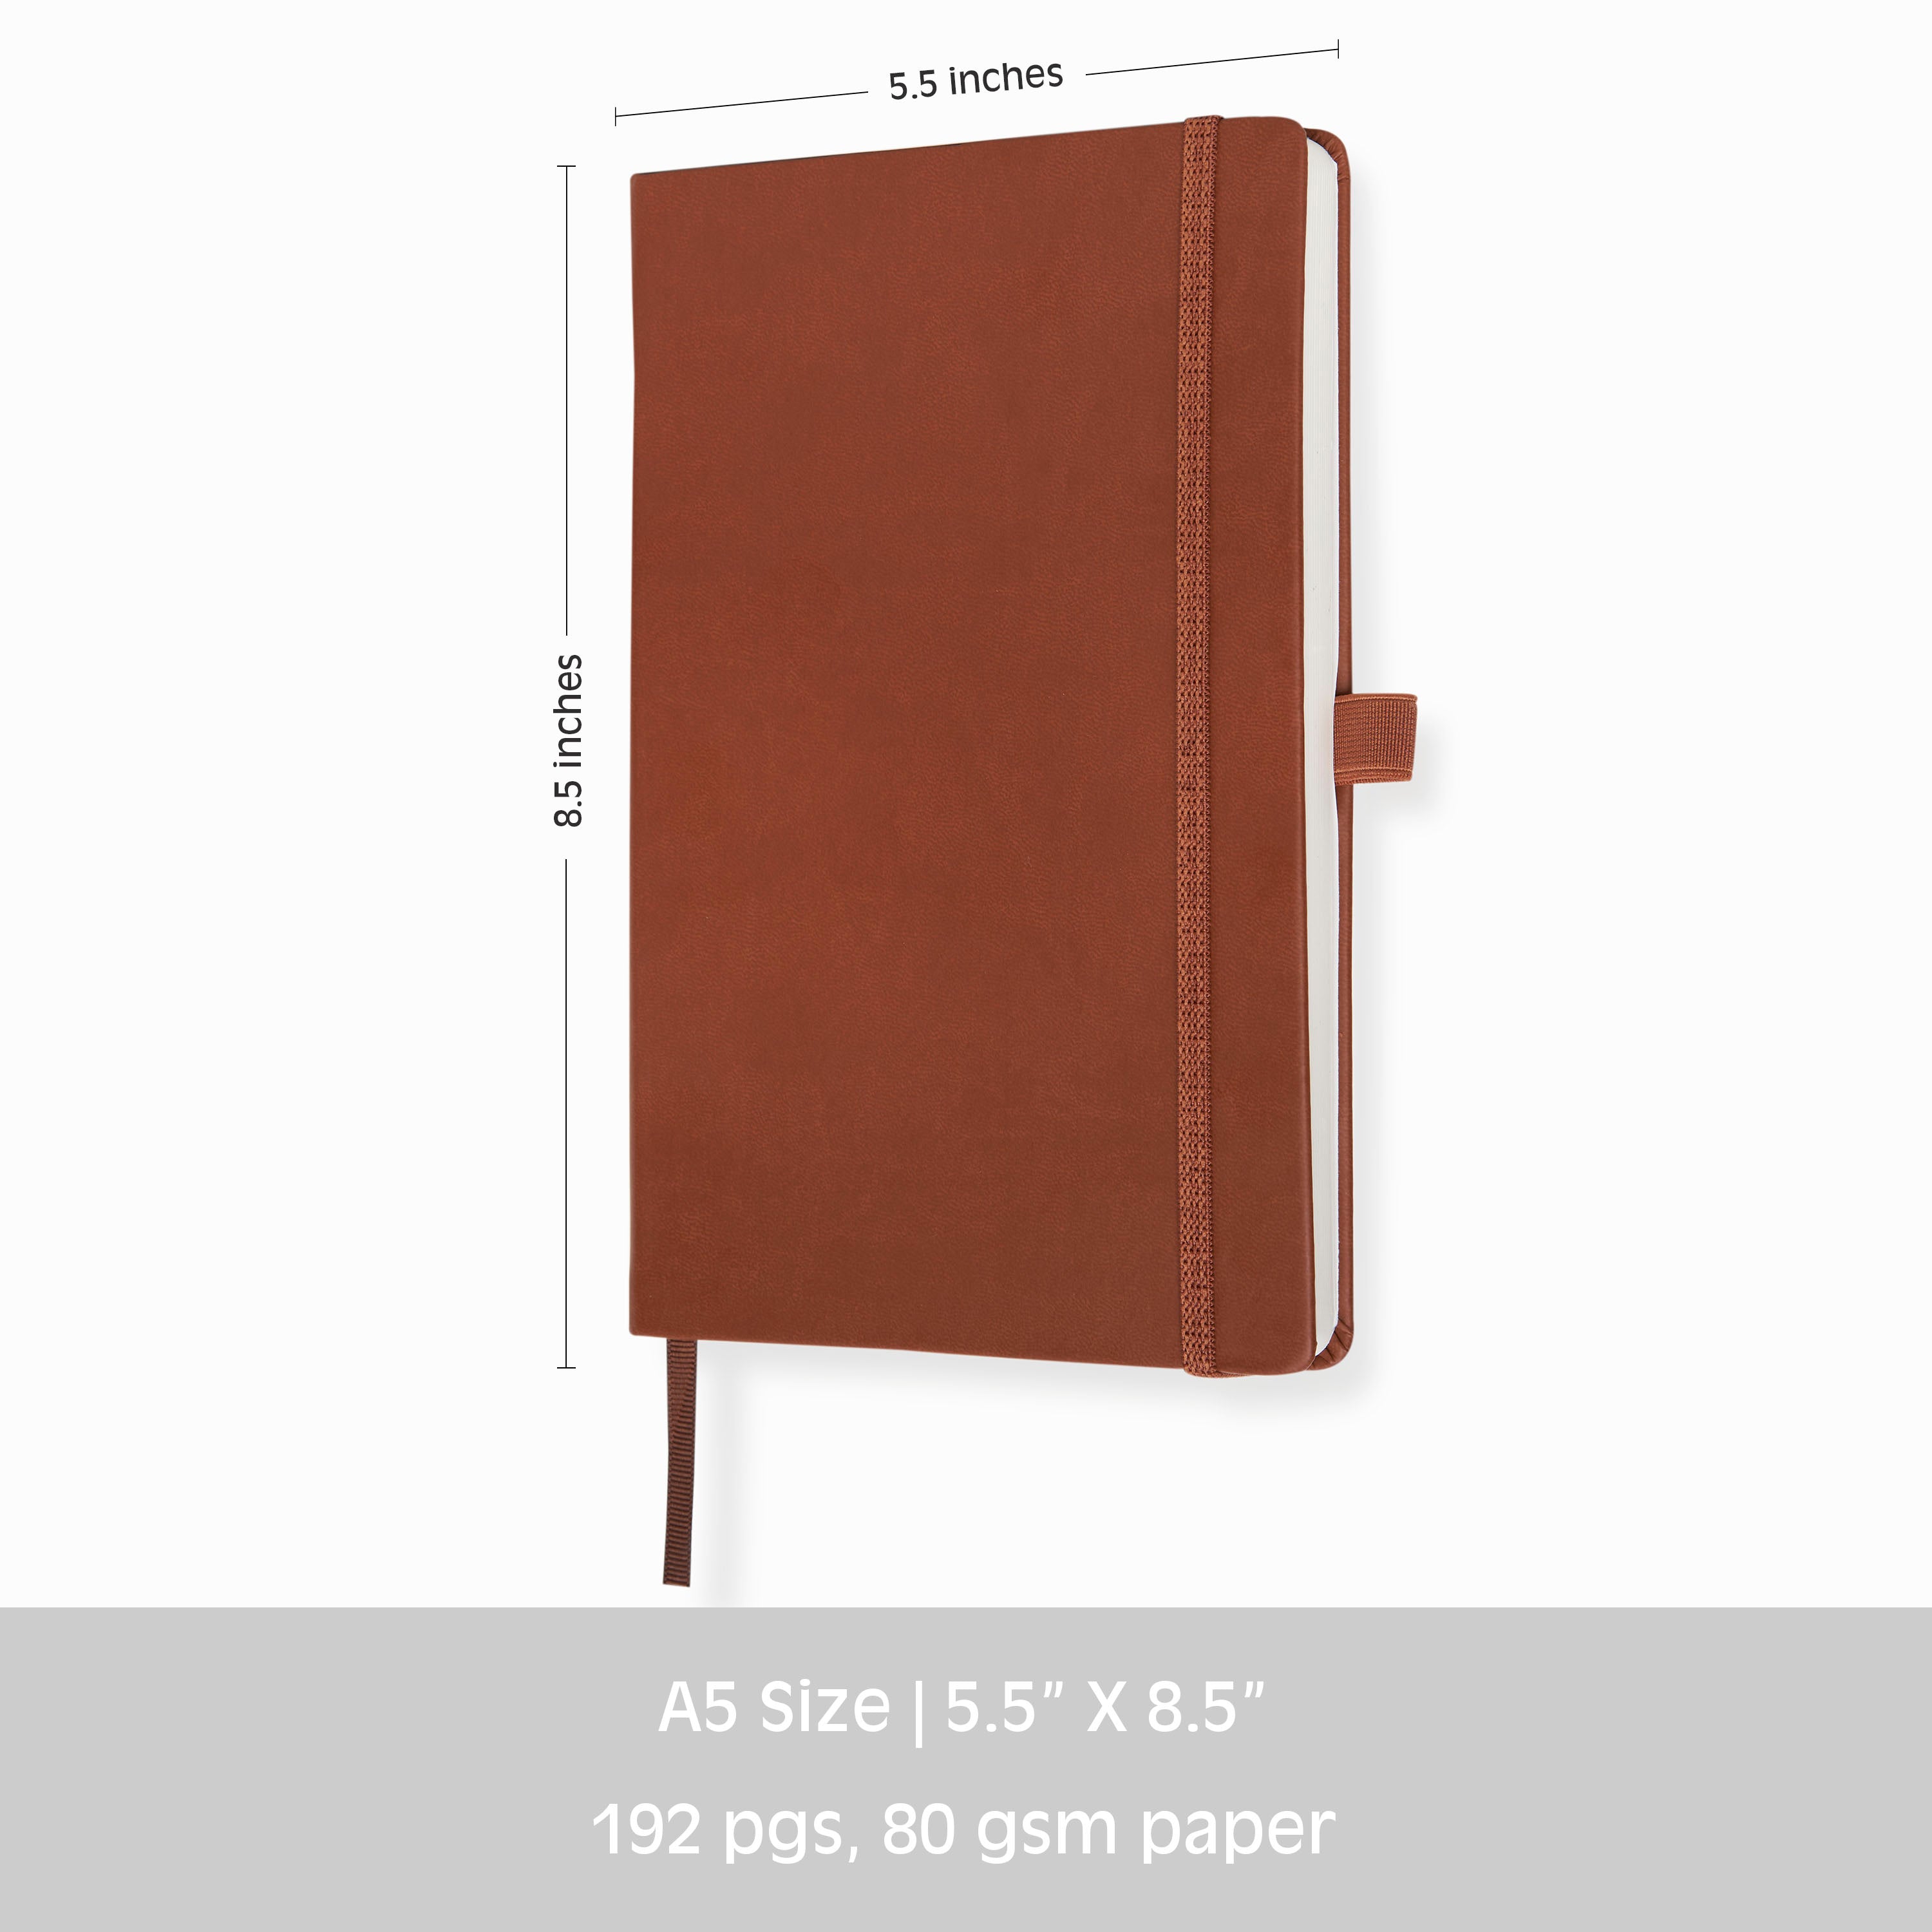 Pro Series Executive A5 PU Leather Hardbound Ruled Diary with Pen Loop - Brown